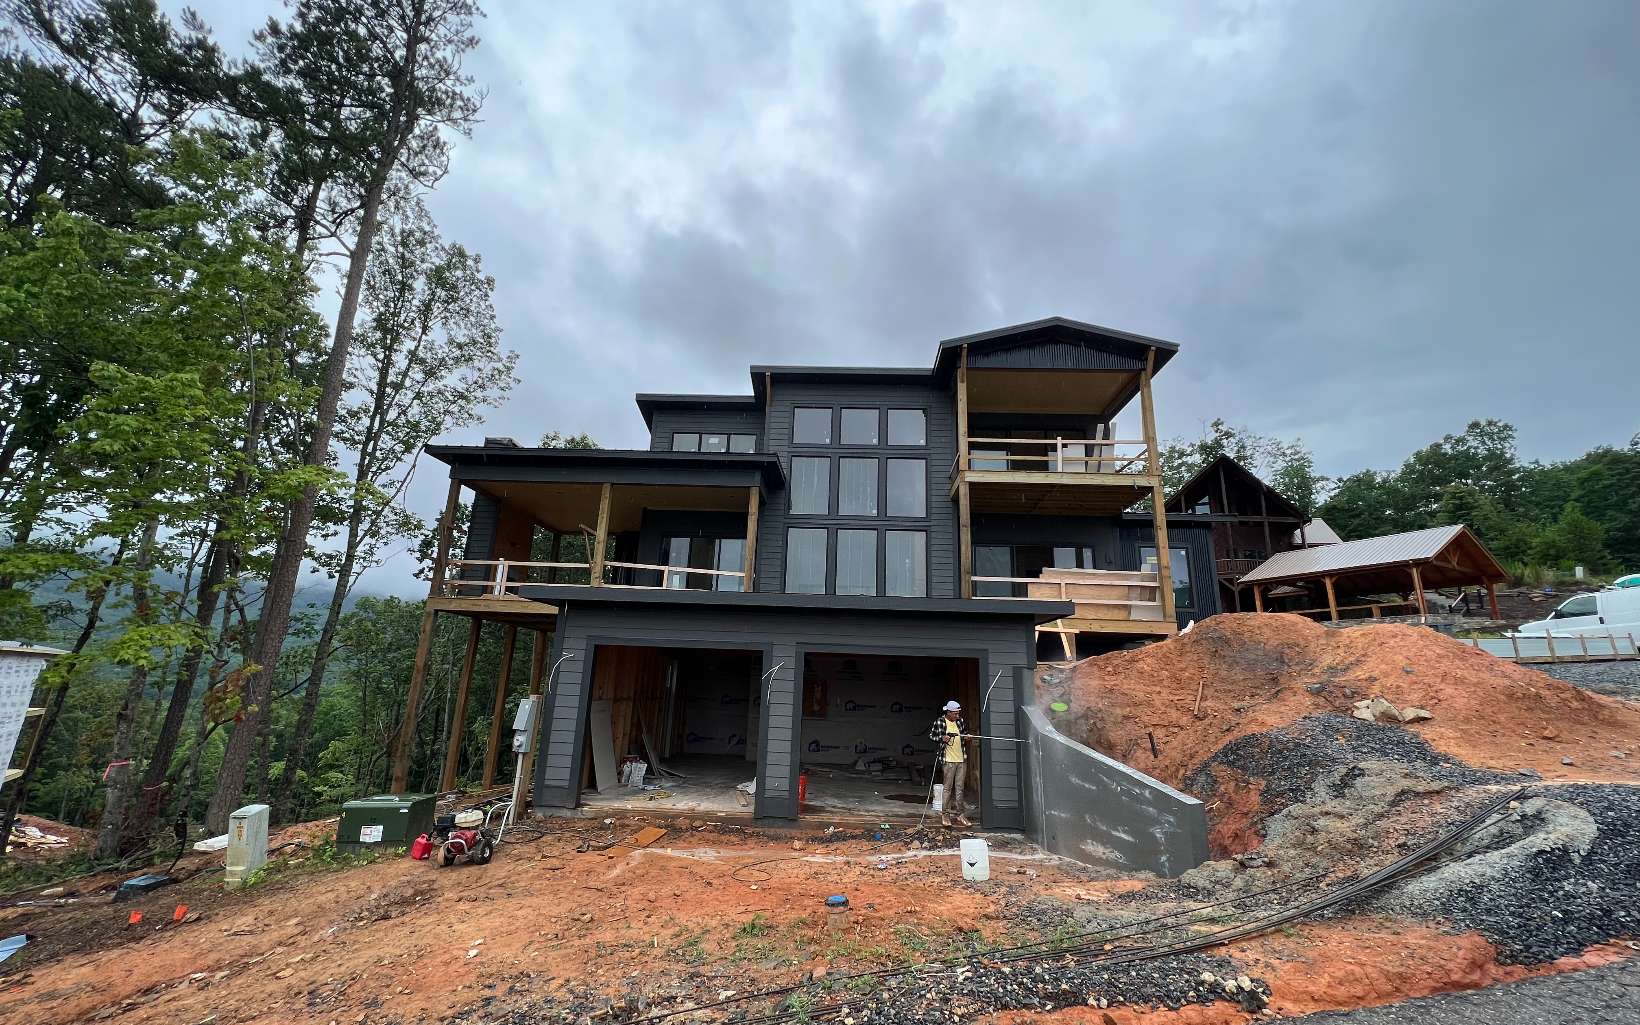 UNDER CONSTRUCTION! Mountain modern meets contemporary luxury in this chalet above the clouds. A custom design by architect Tony Boyatt, This Mountain Modern home features gabled roofs mixed with mono-slope roof lines. The mono-slope roof lines lift to optimize the views of the surrounding mountains & Lake Blue Ridge, bringing the natural light inside. The interior blends materials from both rustic and modern pallets for the perfect combination. While the reclaimed lumber gives the home a rustic sense, the white quartz oversized island & expansive glass windows offer a modern twist. Upon completion you will find upgraded appliances & a custom interior design by BH Interiors, leaving no detail out. Come add your personalized final touches:)